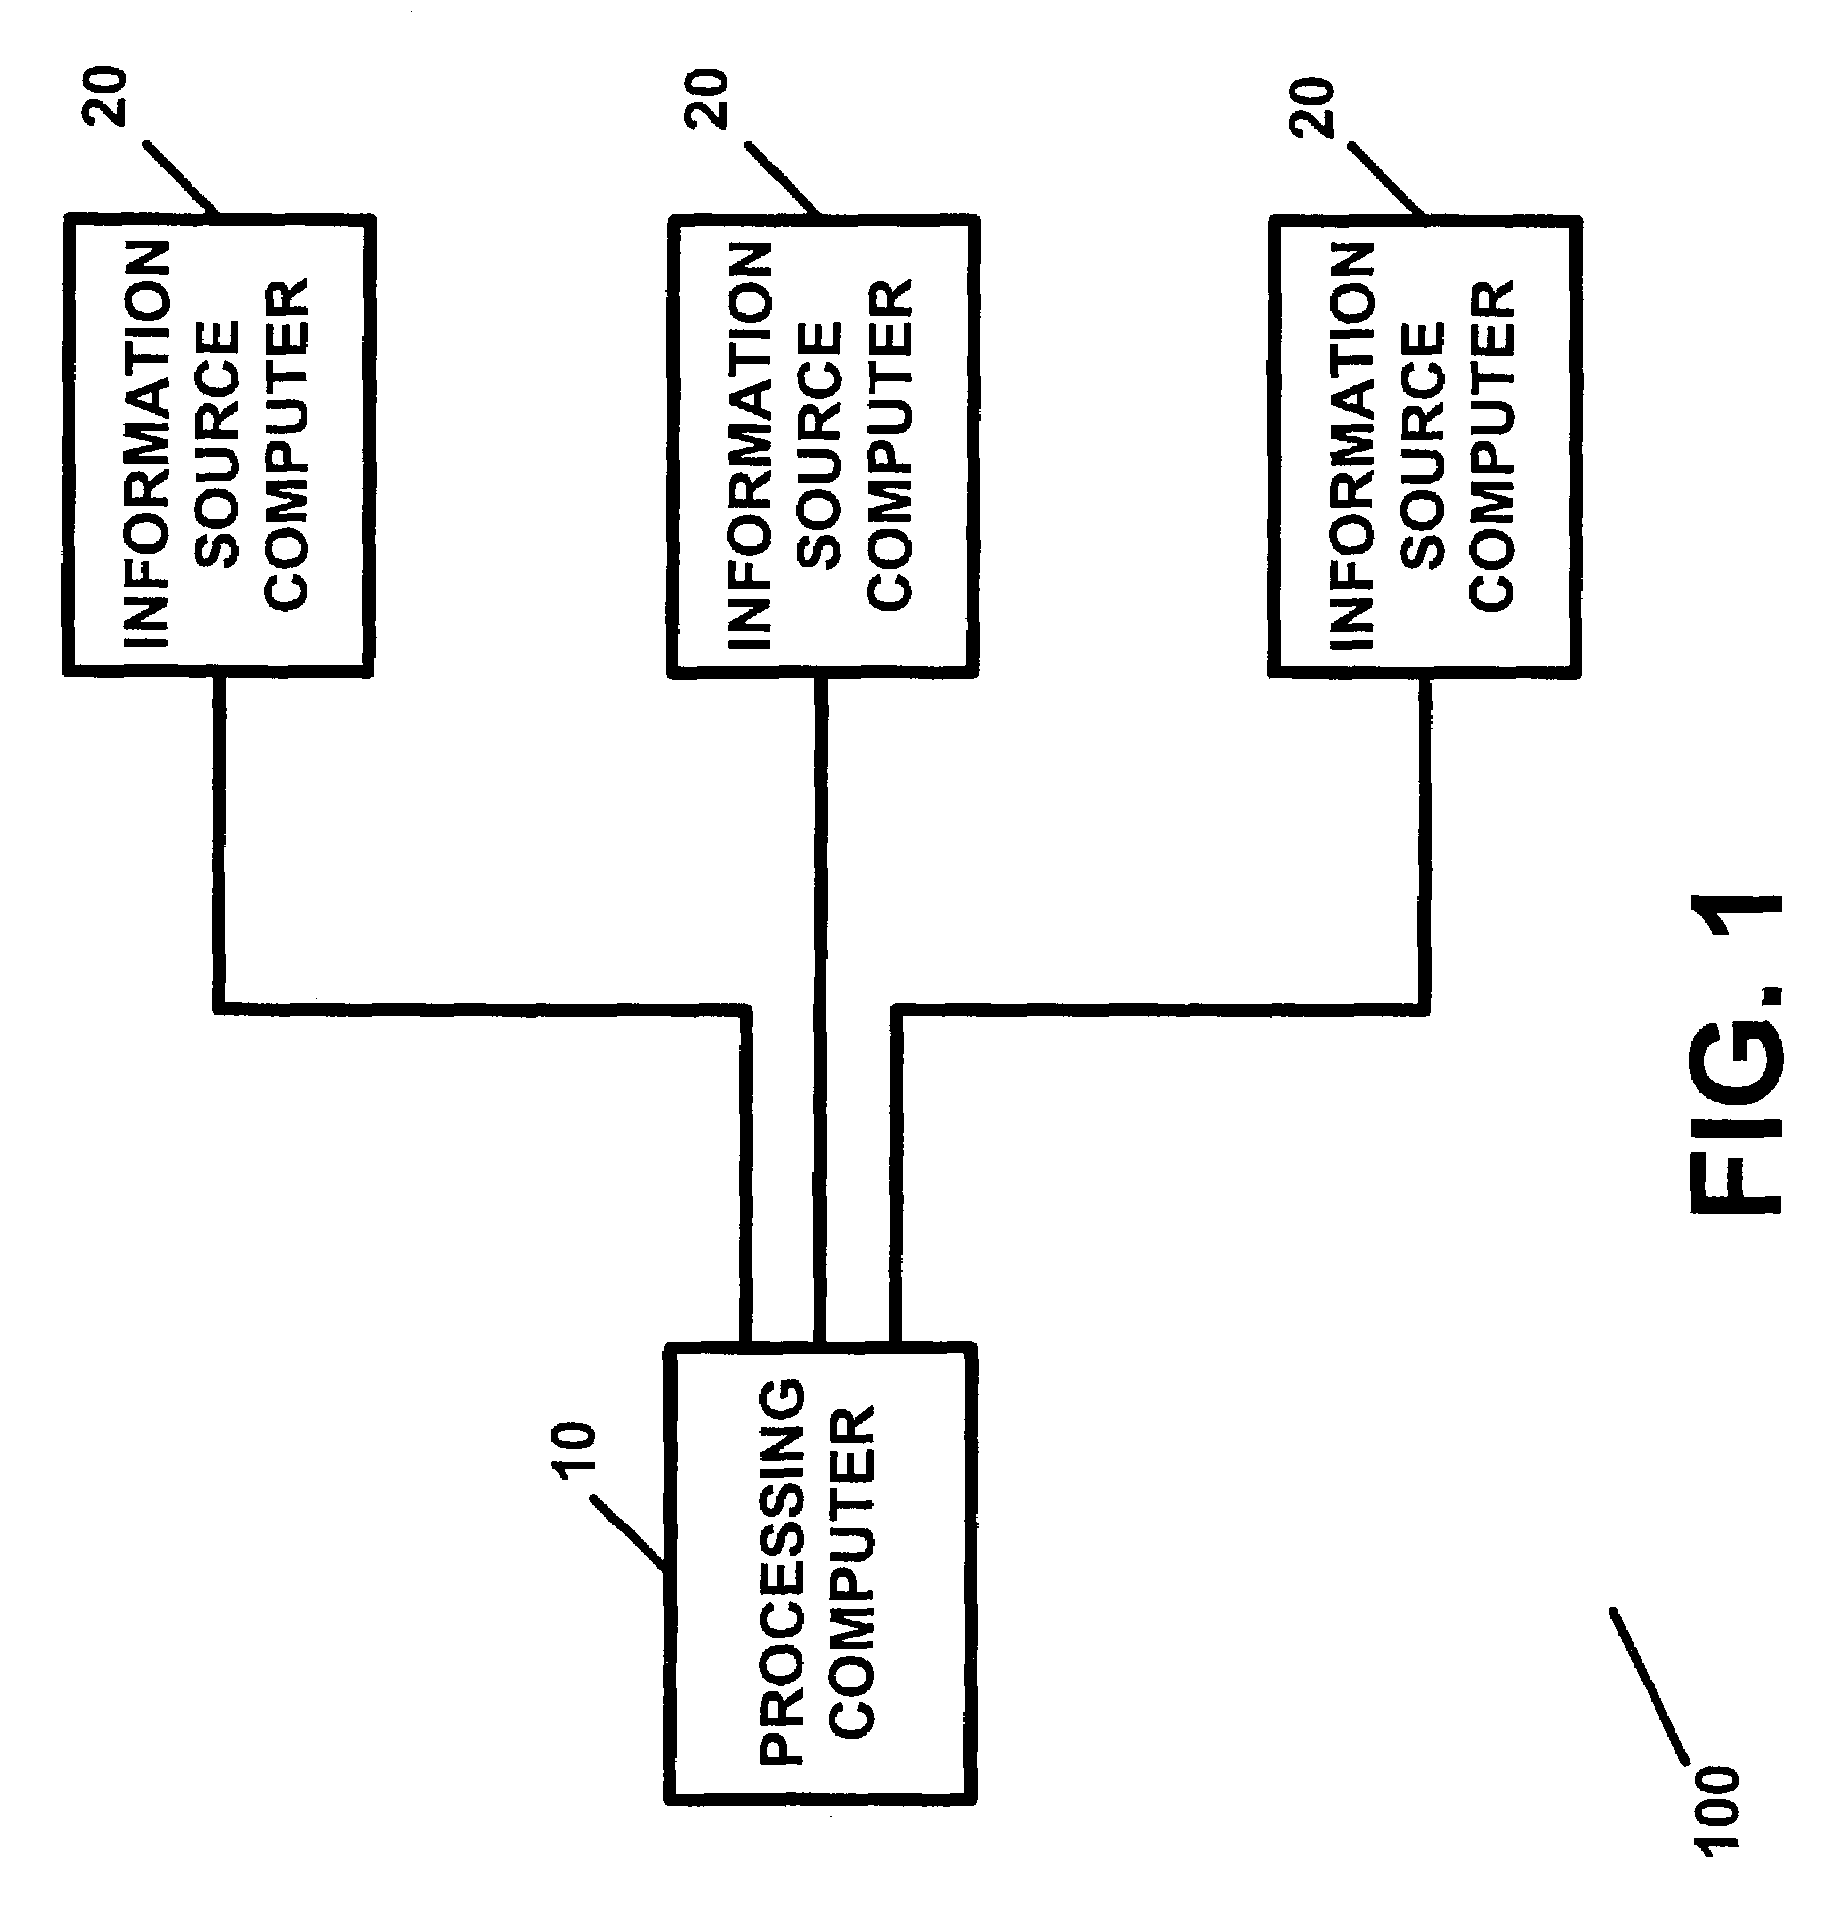 Apparatus and method for identifying and/or for analyzing potential patent infringement